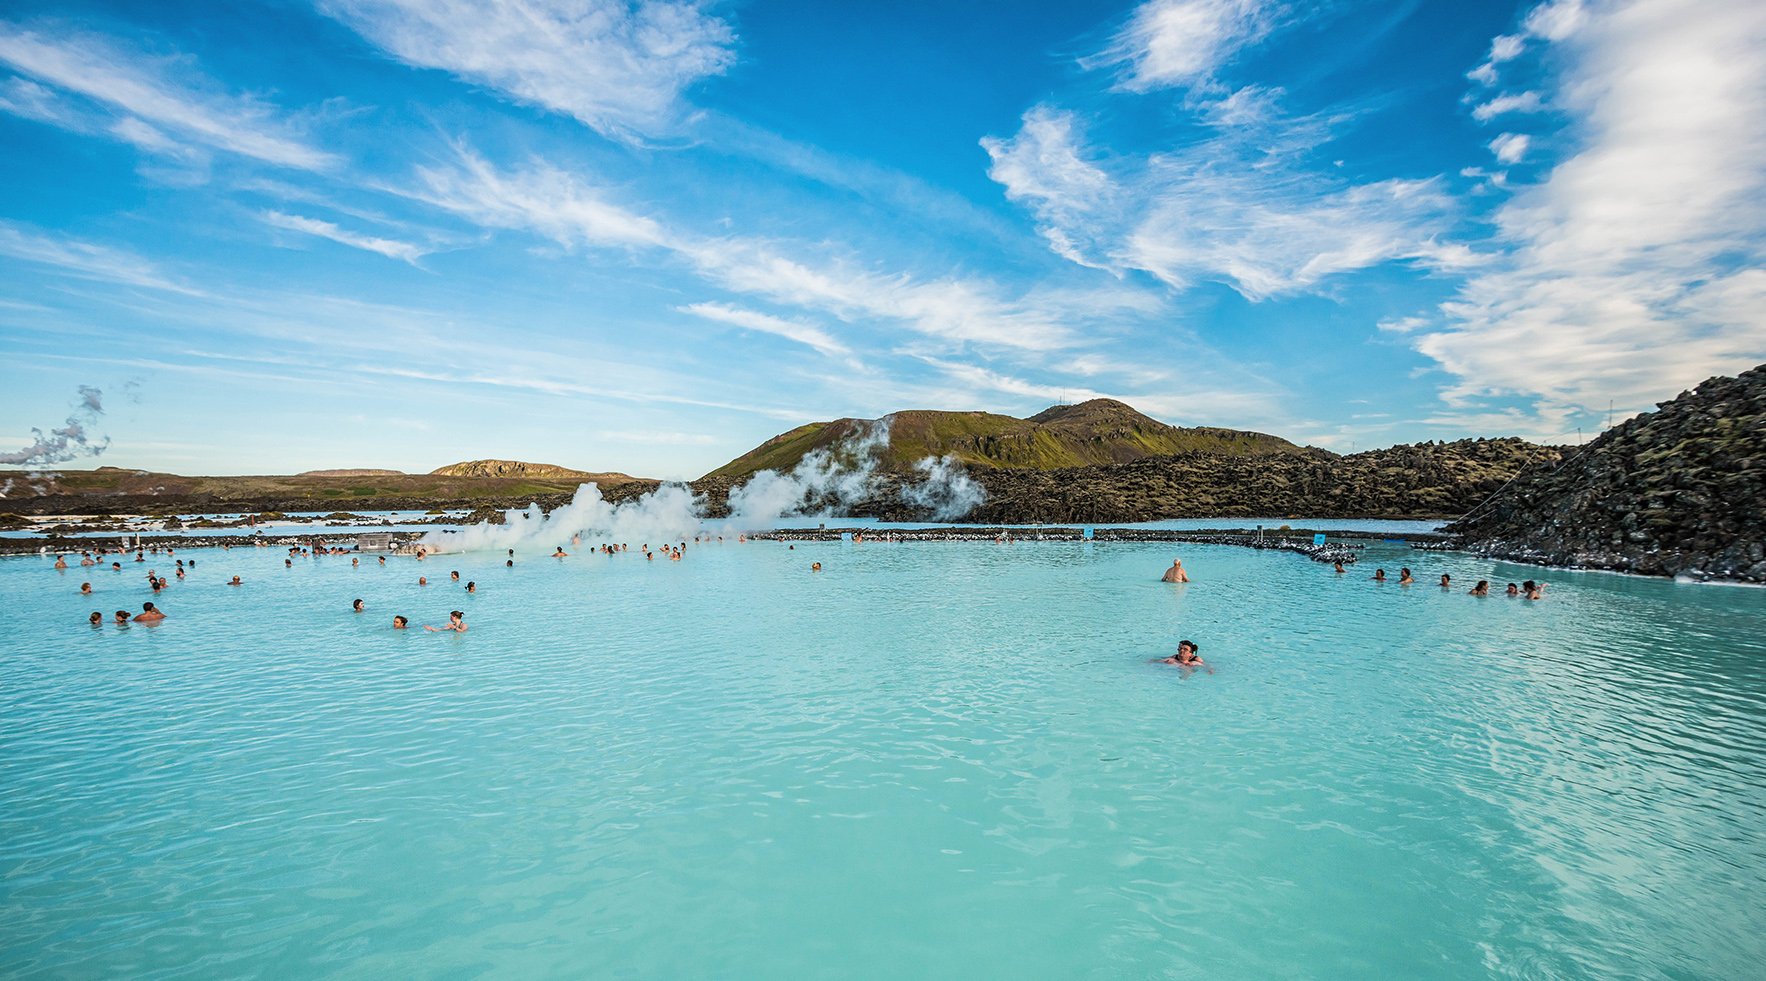 The geothermal Blue Lagoon baths are  a popular stop for Quark Expeditions guests who spend time in Reykjavik, Iceland, before or after their Arctic voyage.